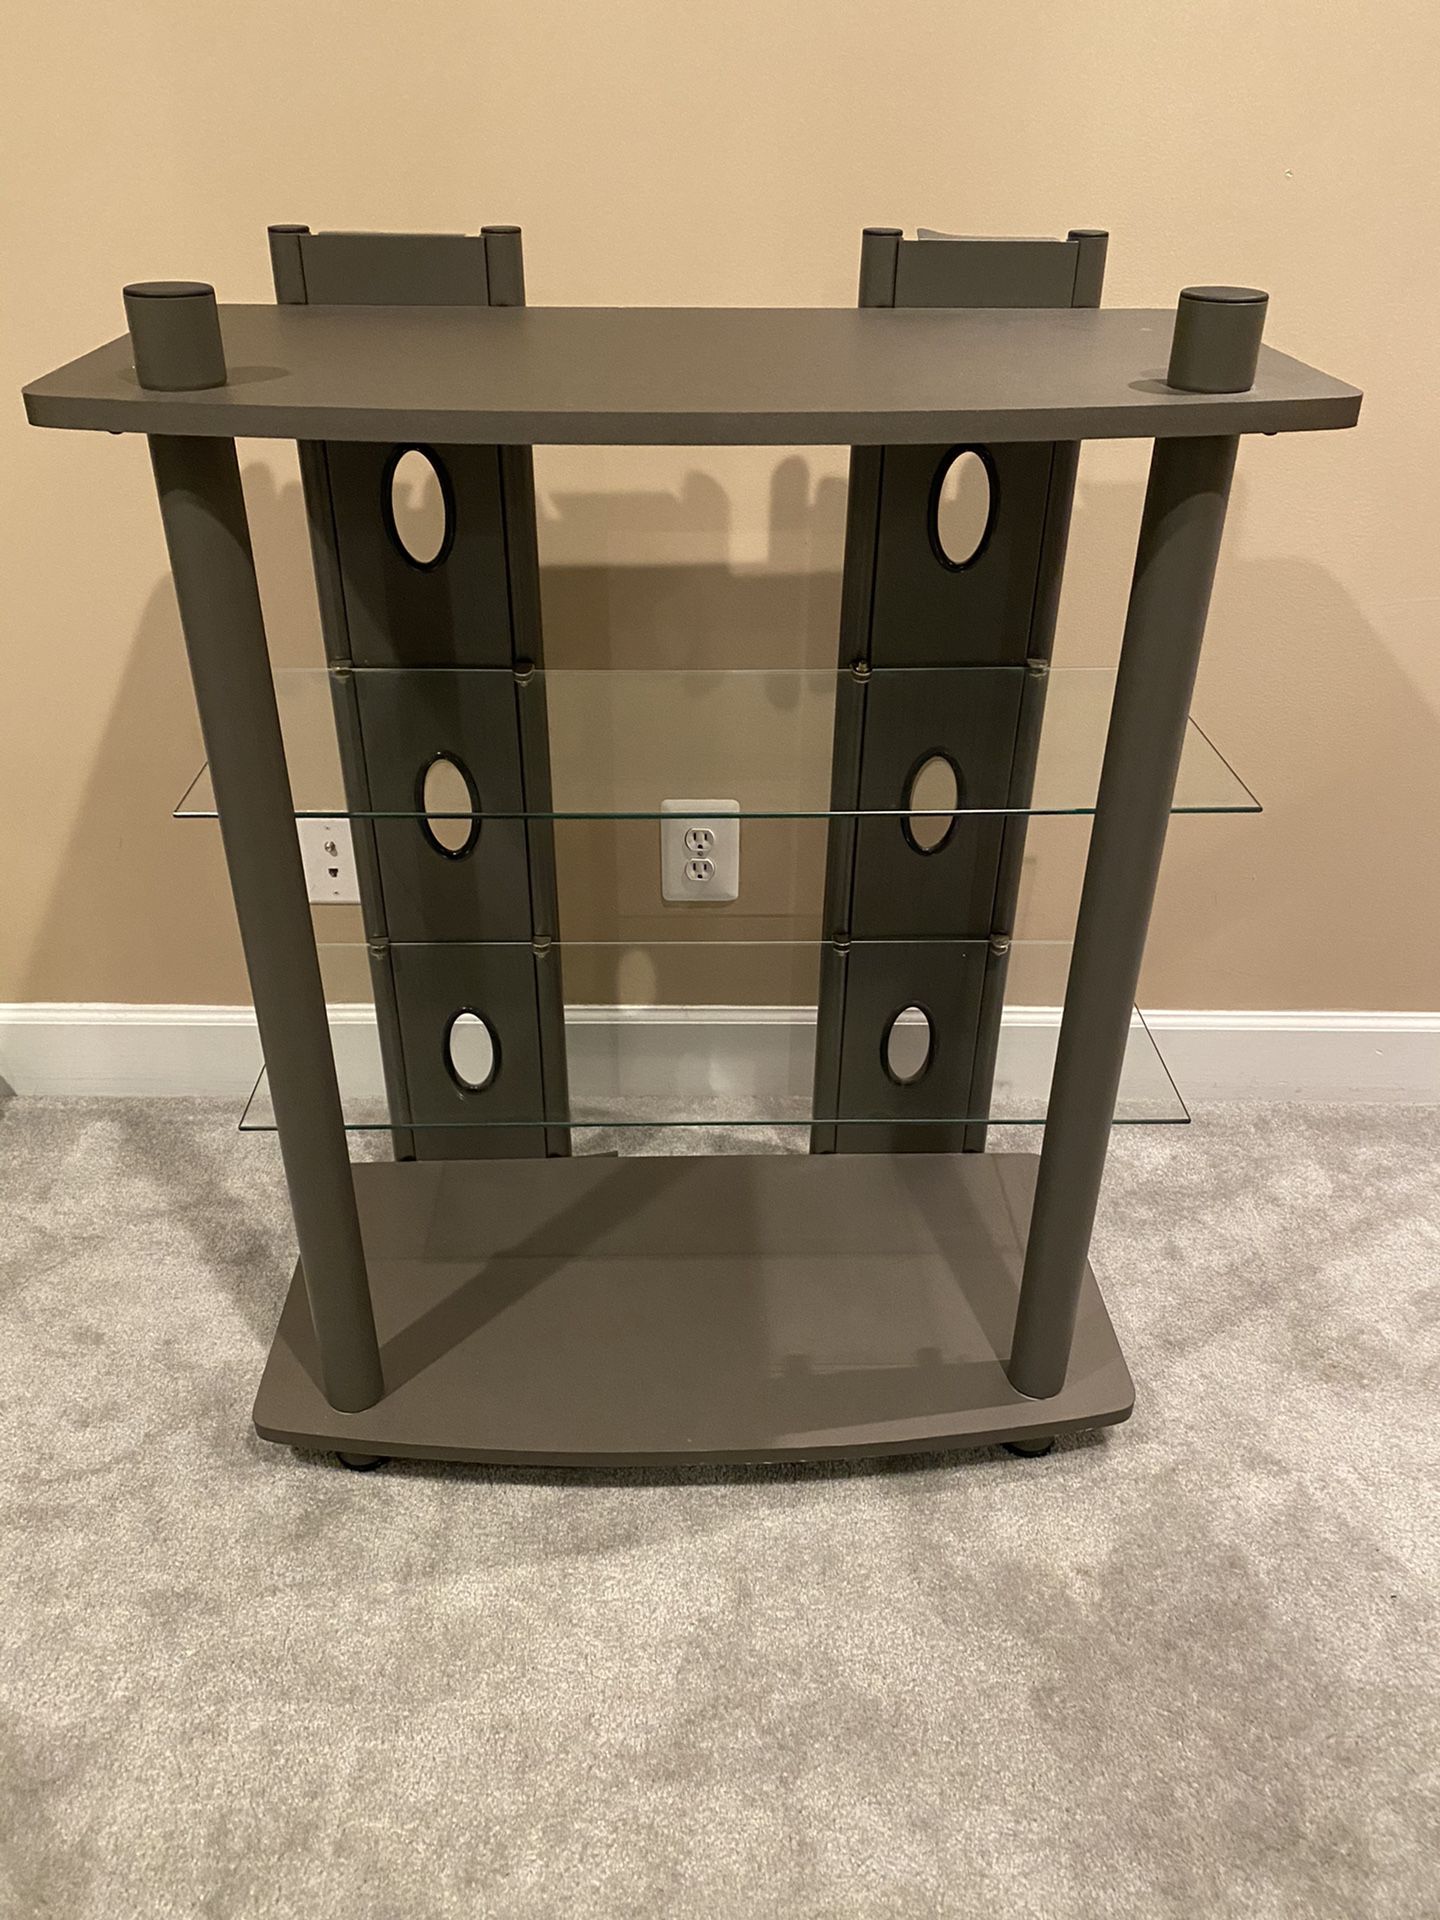 Beautiful Metal and Glass shelf - in great condition